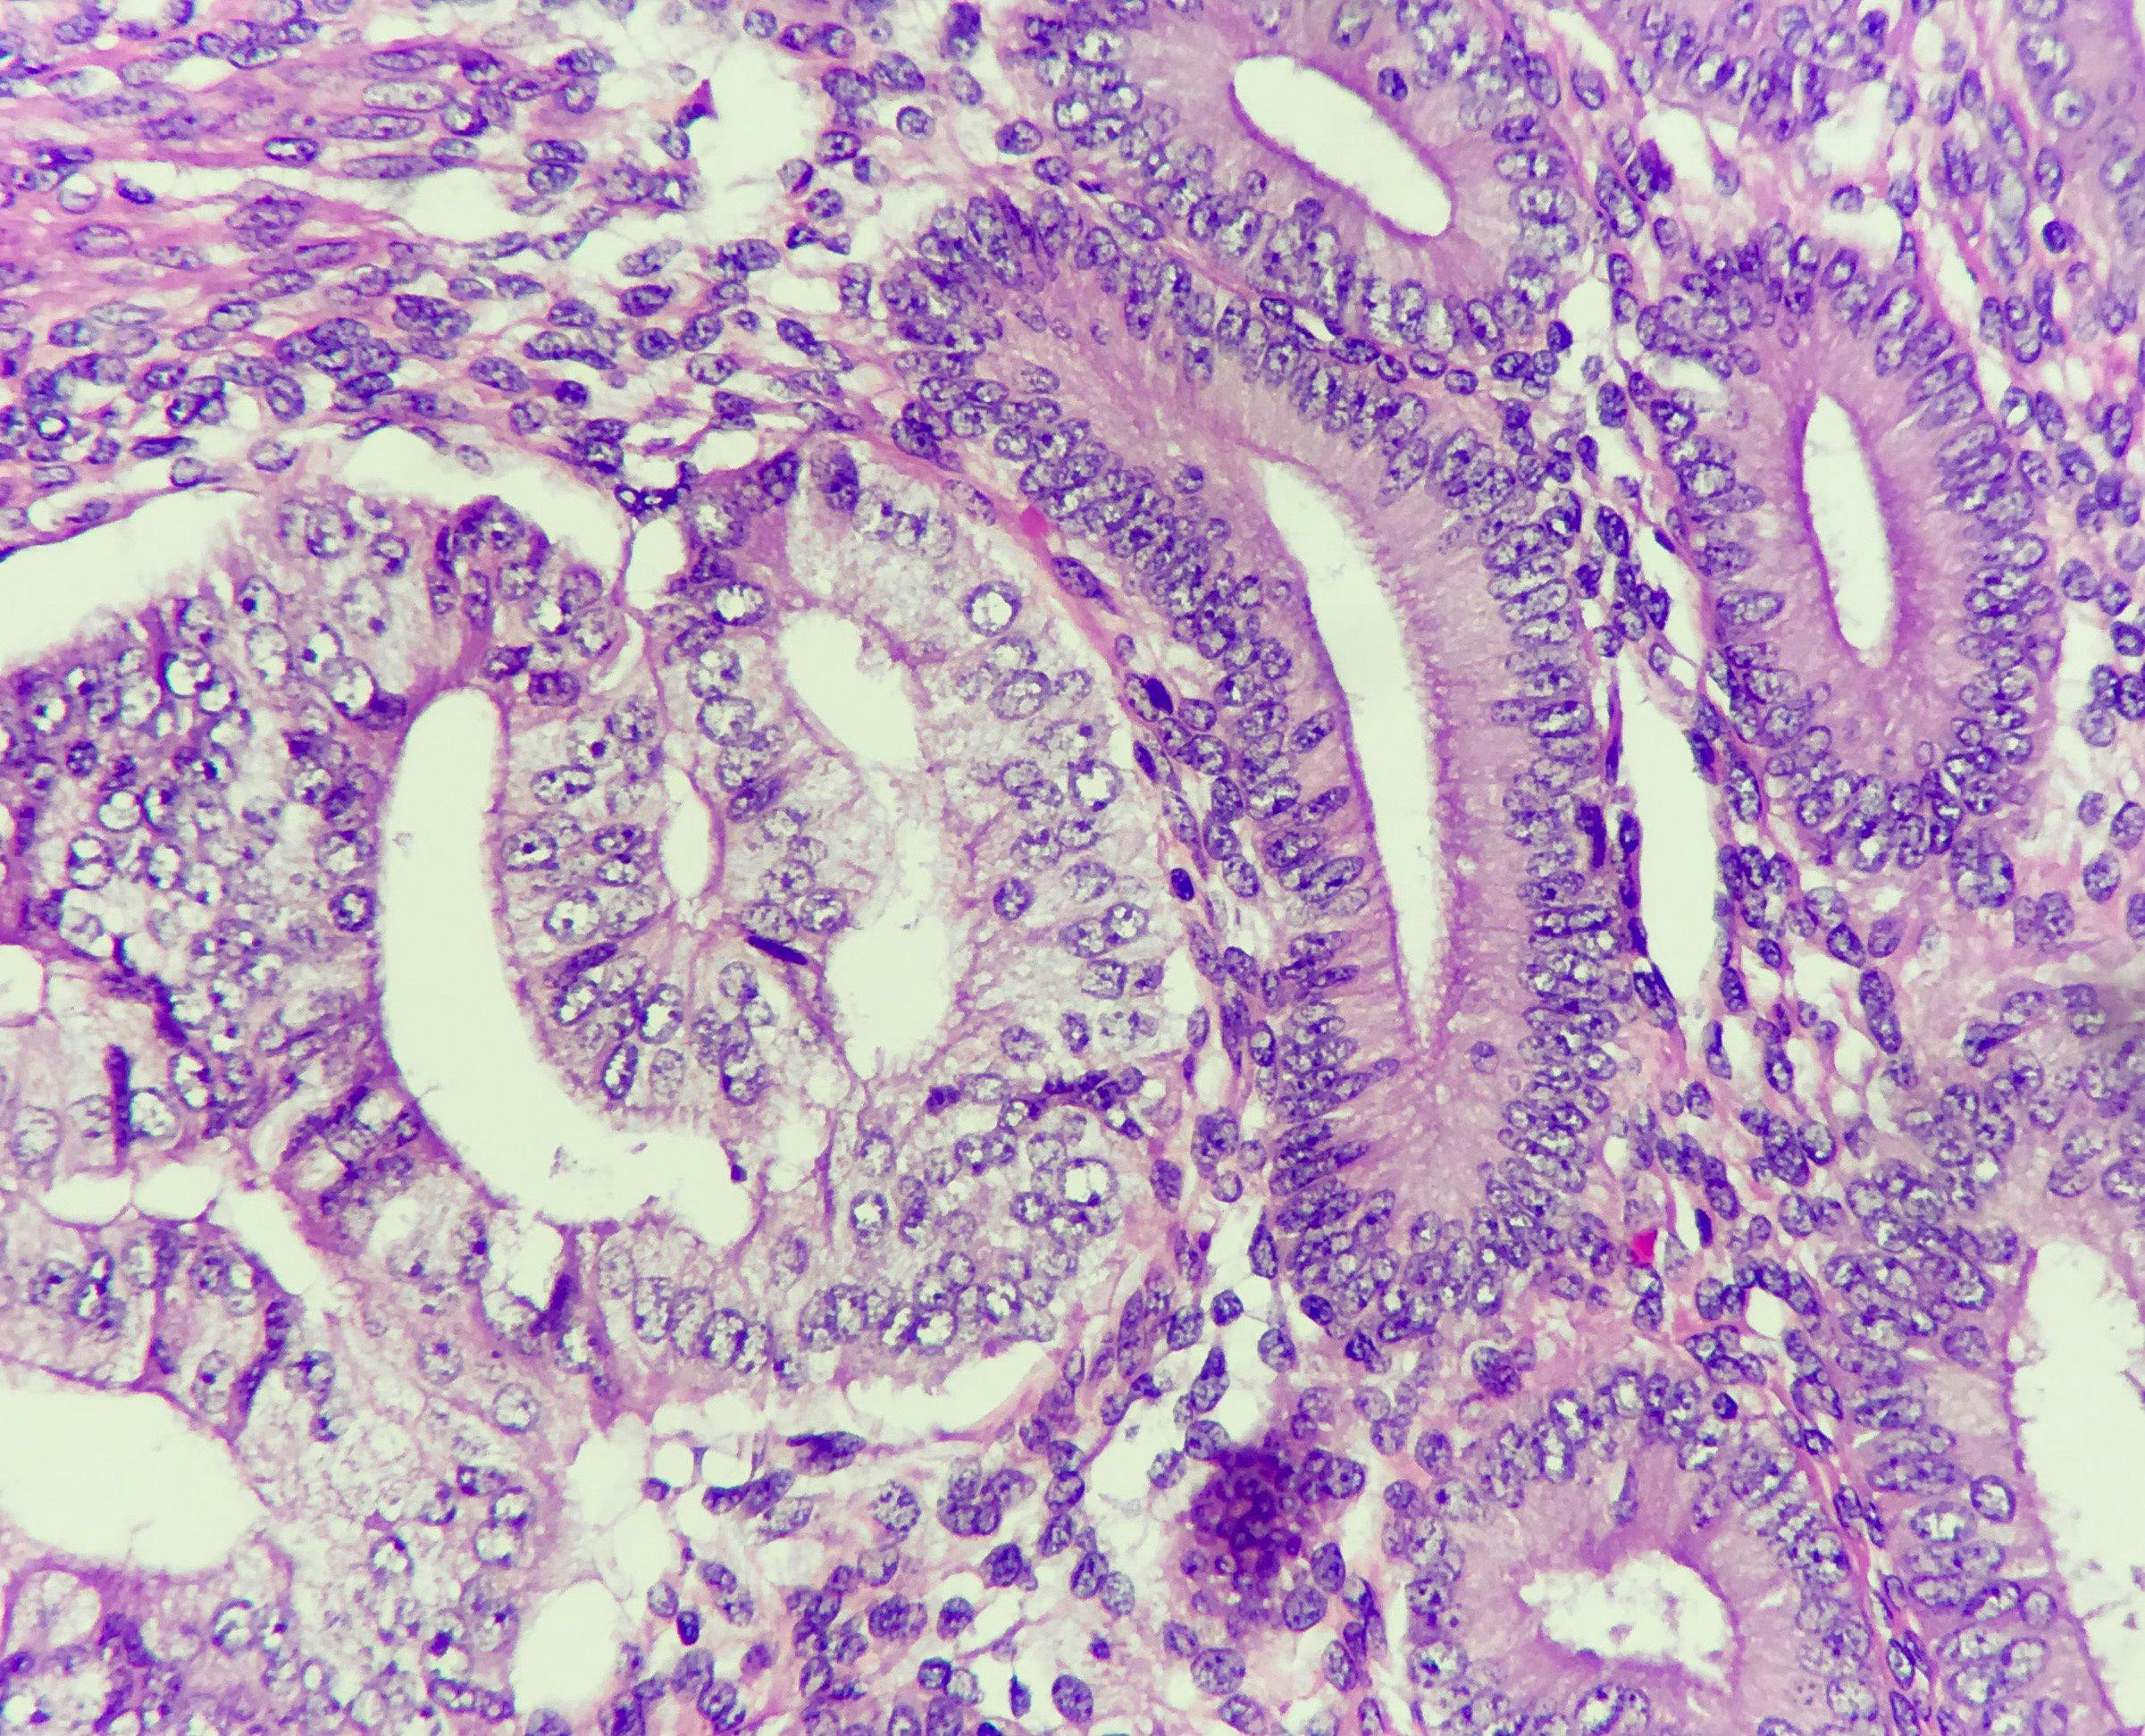 Photo of endometrial cancer on the left and normal endometrial gland on the right, magnification 400x | Image Credit: © Chutima - [stock.adobe.com]